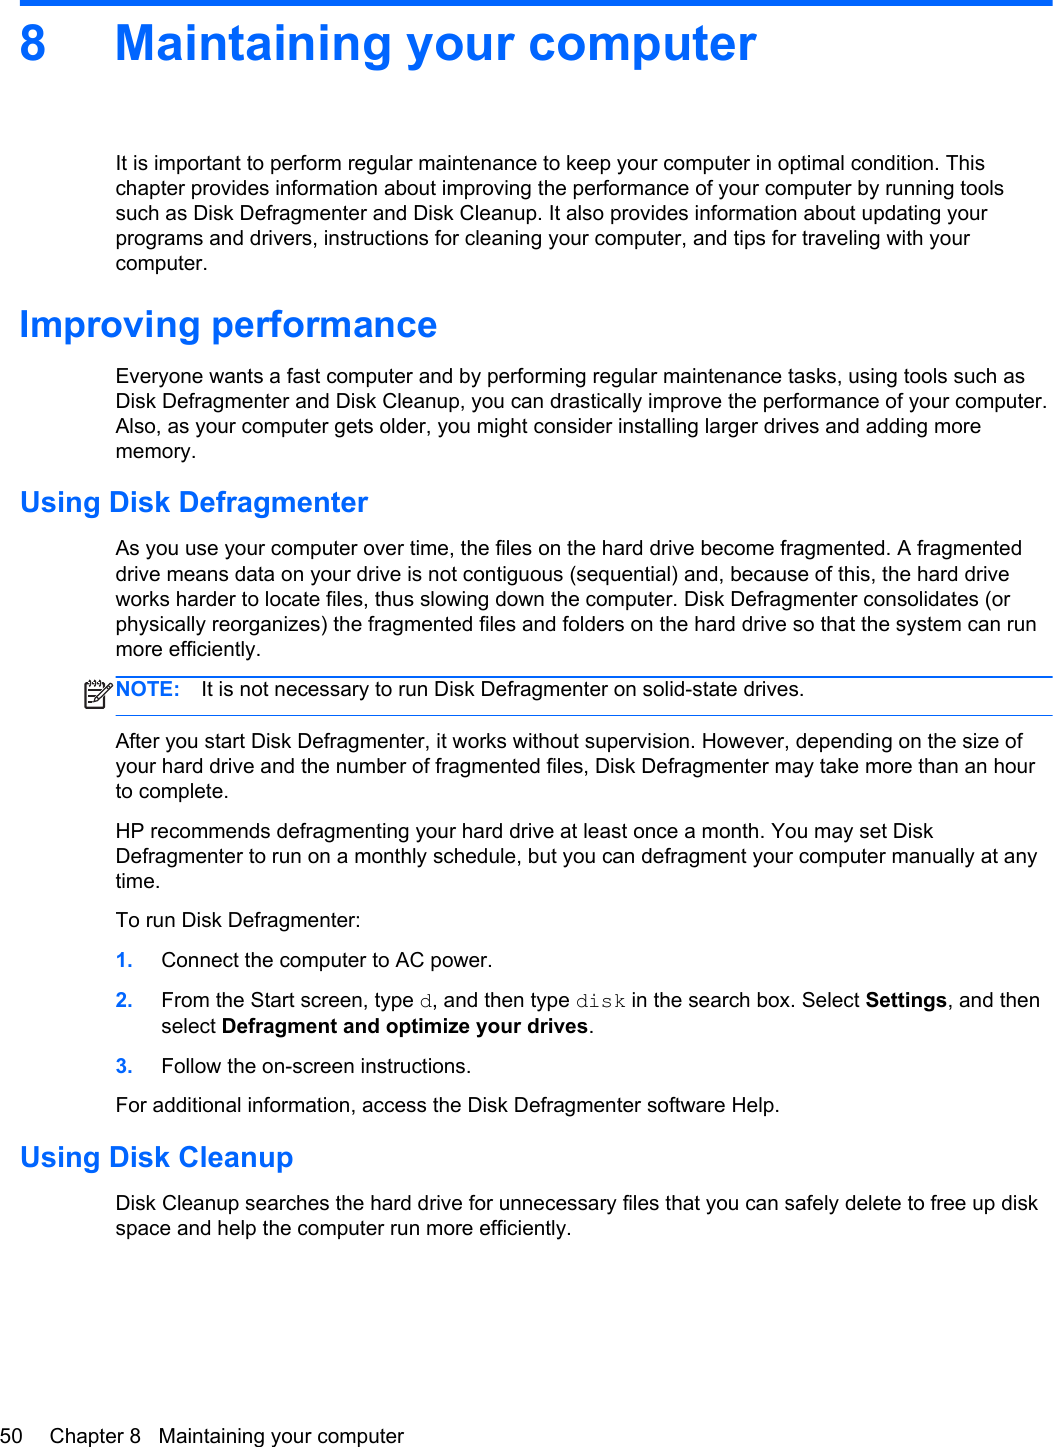 8 Maintaining your computerIt is important to perform regular maintenance to keep your computer in optimal condition. Thischapter provides information about improving the performance of your computer by running toolssuch as Disk Defragmenter and Disk Cleanup. It also provides information about updating yourprograms and drivers, instructions for cleaning your computer, and tips for traveling with yourcomputer.Improving performanceEveryone wants a fast computer and by performing regular maintenance tasks, using tools such asDisk Defragmenter and Disk Cleanup, you can drastically improve the performance of your computer.Also, as your computer gets older, you might consider installing larger drives and adding morememory.Using Disk DefragmenterAs you use your computer over time, the files on the hard drive become fragmented. A fragmenteddrive means data on your drive is not contiguous (sequential) and, because of this, the hard driveworks harder to locate files, thus slowing down the computer. Disk Defragmenter consolidates (orphysically reorganizes) the fragmented files and folders on the hard drive so that the system can runmore efficiently.NOTE: It is not necessary to run Disk Defragmenter on solid-state drives.After you start Disk Defragmenter, it works without supervision. However, depending on the size ofyour hard drive and the number of fragmented files, Disk Defragmenter may take more than an hourto complete.HP recommends defragmenting your hard drive at least once a month. You may set DiskDefragmenter to run on a monthly schedule, but you can defragment your computer manually at anytime.To run Disk Defragmenter:1. Connect the computer to AC power.2. From the Start screen, type d, and then type disk in the search box. Select Settings, and thenselect Defragment and optimize your drives.3. Follow the on-screen instructions.For additional information, access the Disk Defragmenter software Help.Using Disk CleanupDisk Cleanup searches the hard drive for unnecessary files that you can safely delete to free up diskspace and help the computer run more efficiently.50 Chapter 8   Maintaining your computer